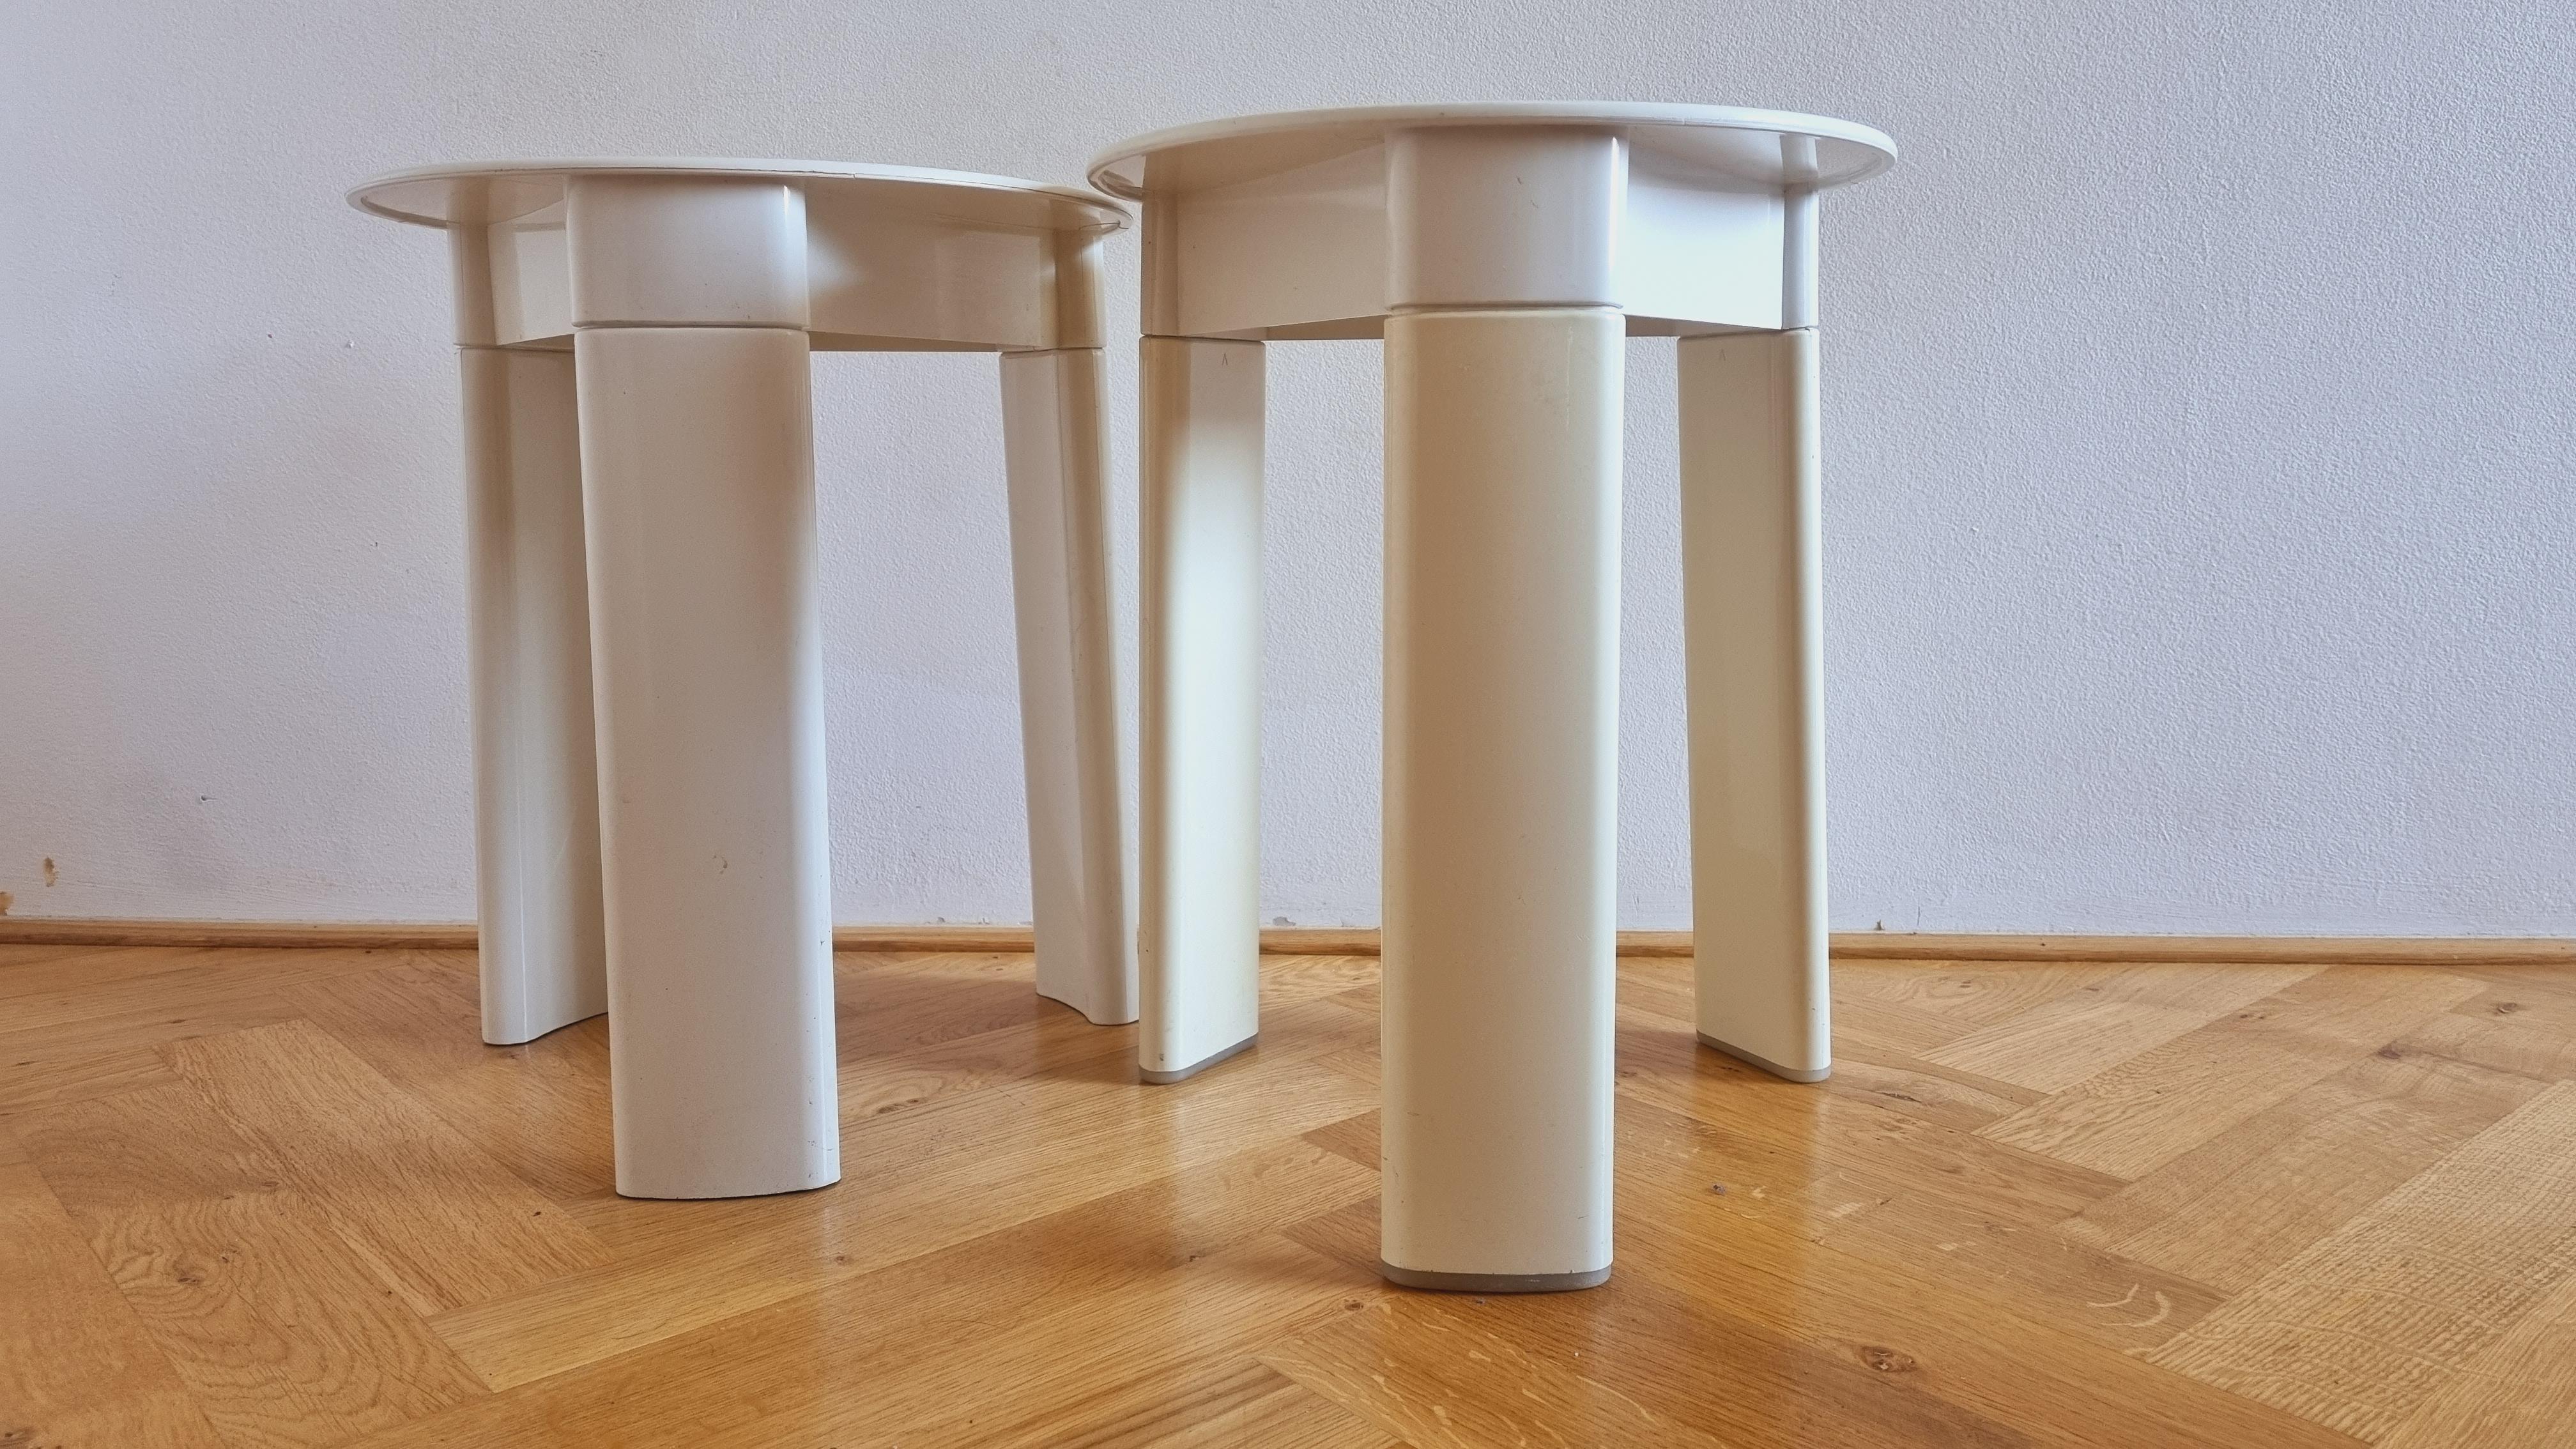 Pair of Midcentury Stools or Side Tables Trio, Olaf Von Bohr, Gedy, Italy, 1970s For Sale 2